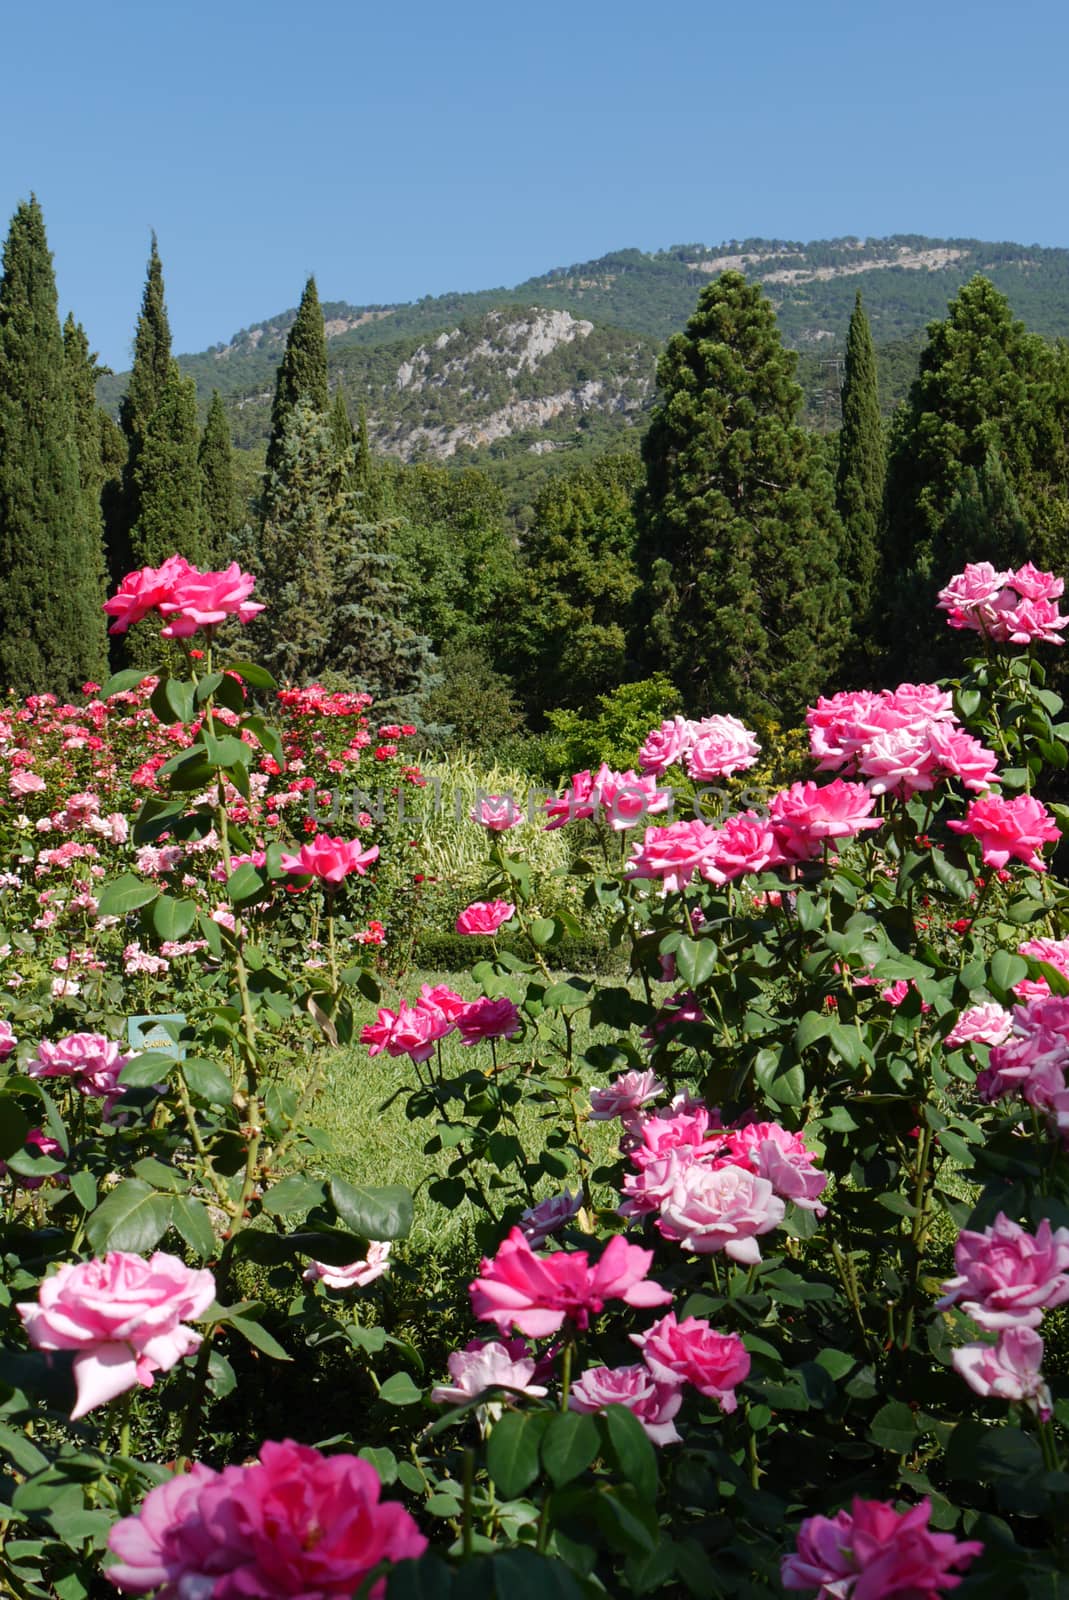 High lush spruce growing around the glade dotted with bushes of beautiful roses against the background of a green mountain slope and a blue sky without clouds.